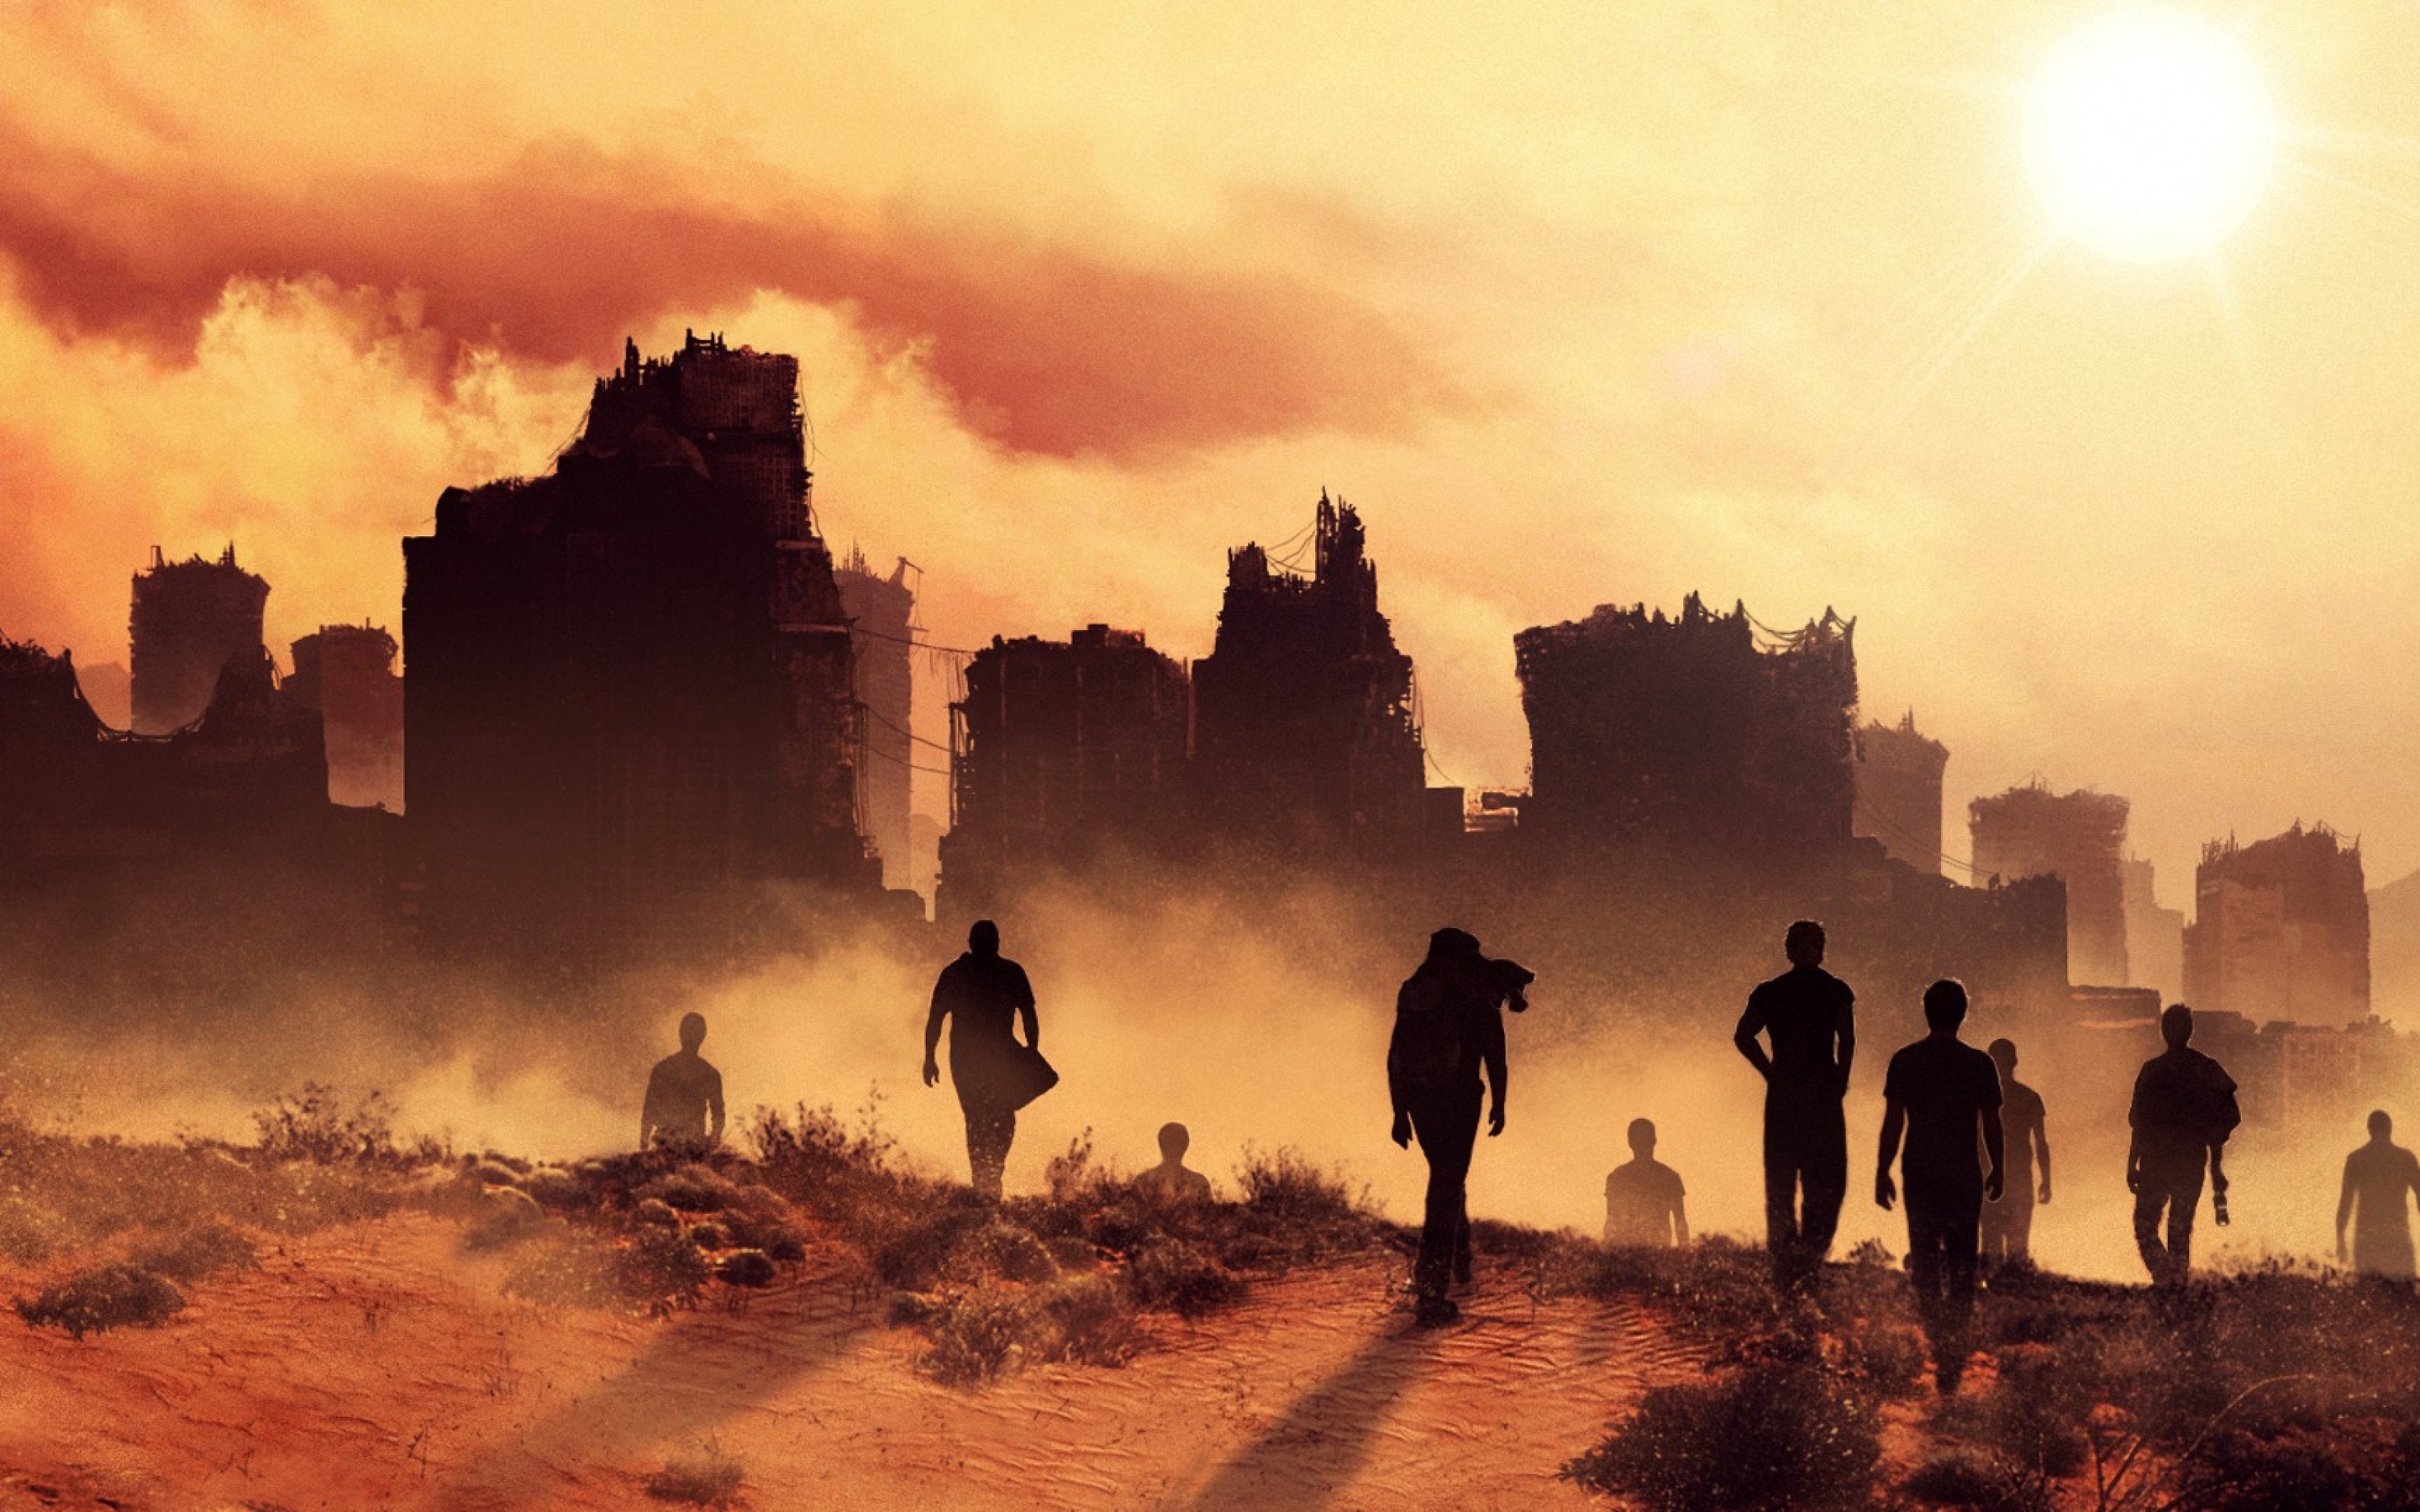 Maze Runner The Scorch Trials Silhouettes for 2880 x 1800 Retina Display resolution